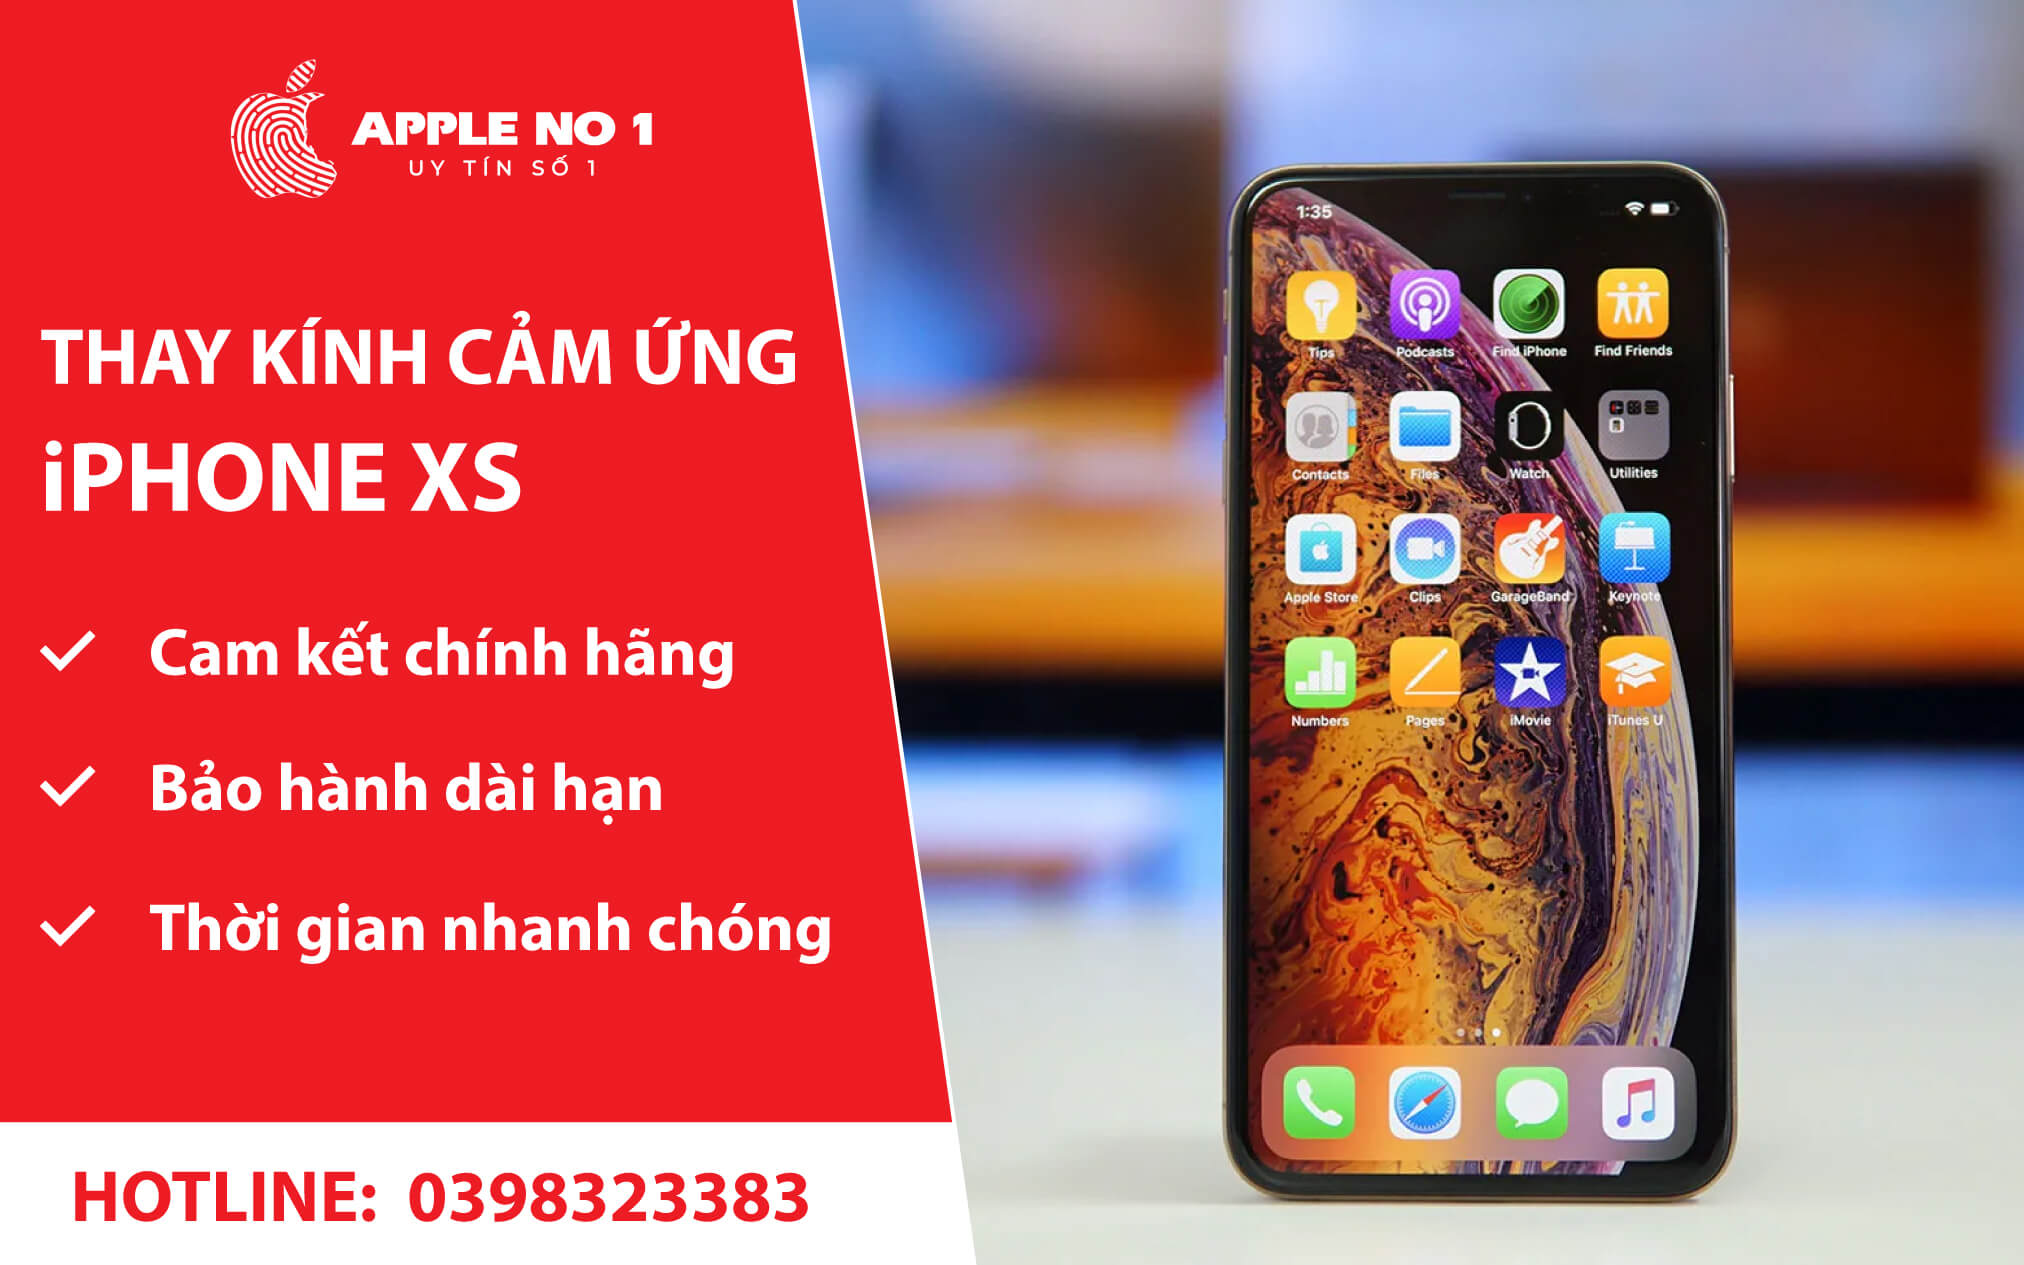 dich vu thay kinh cam ung iphone xs gia re lay ngay tai apple no.1